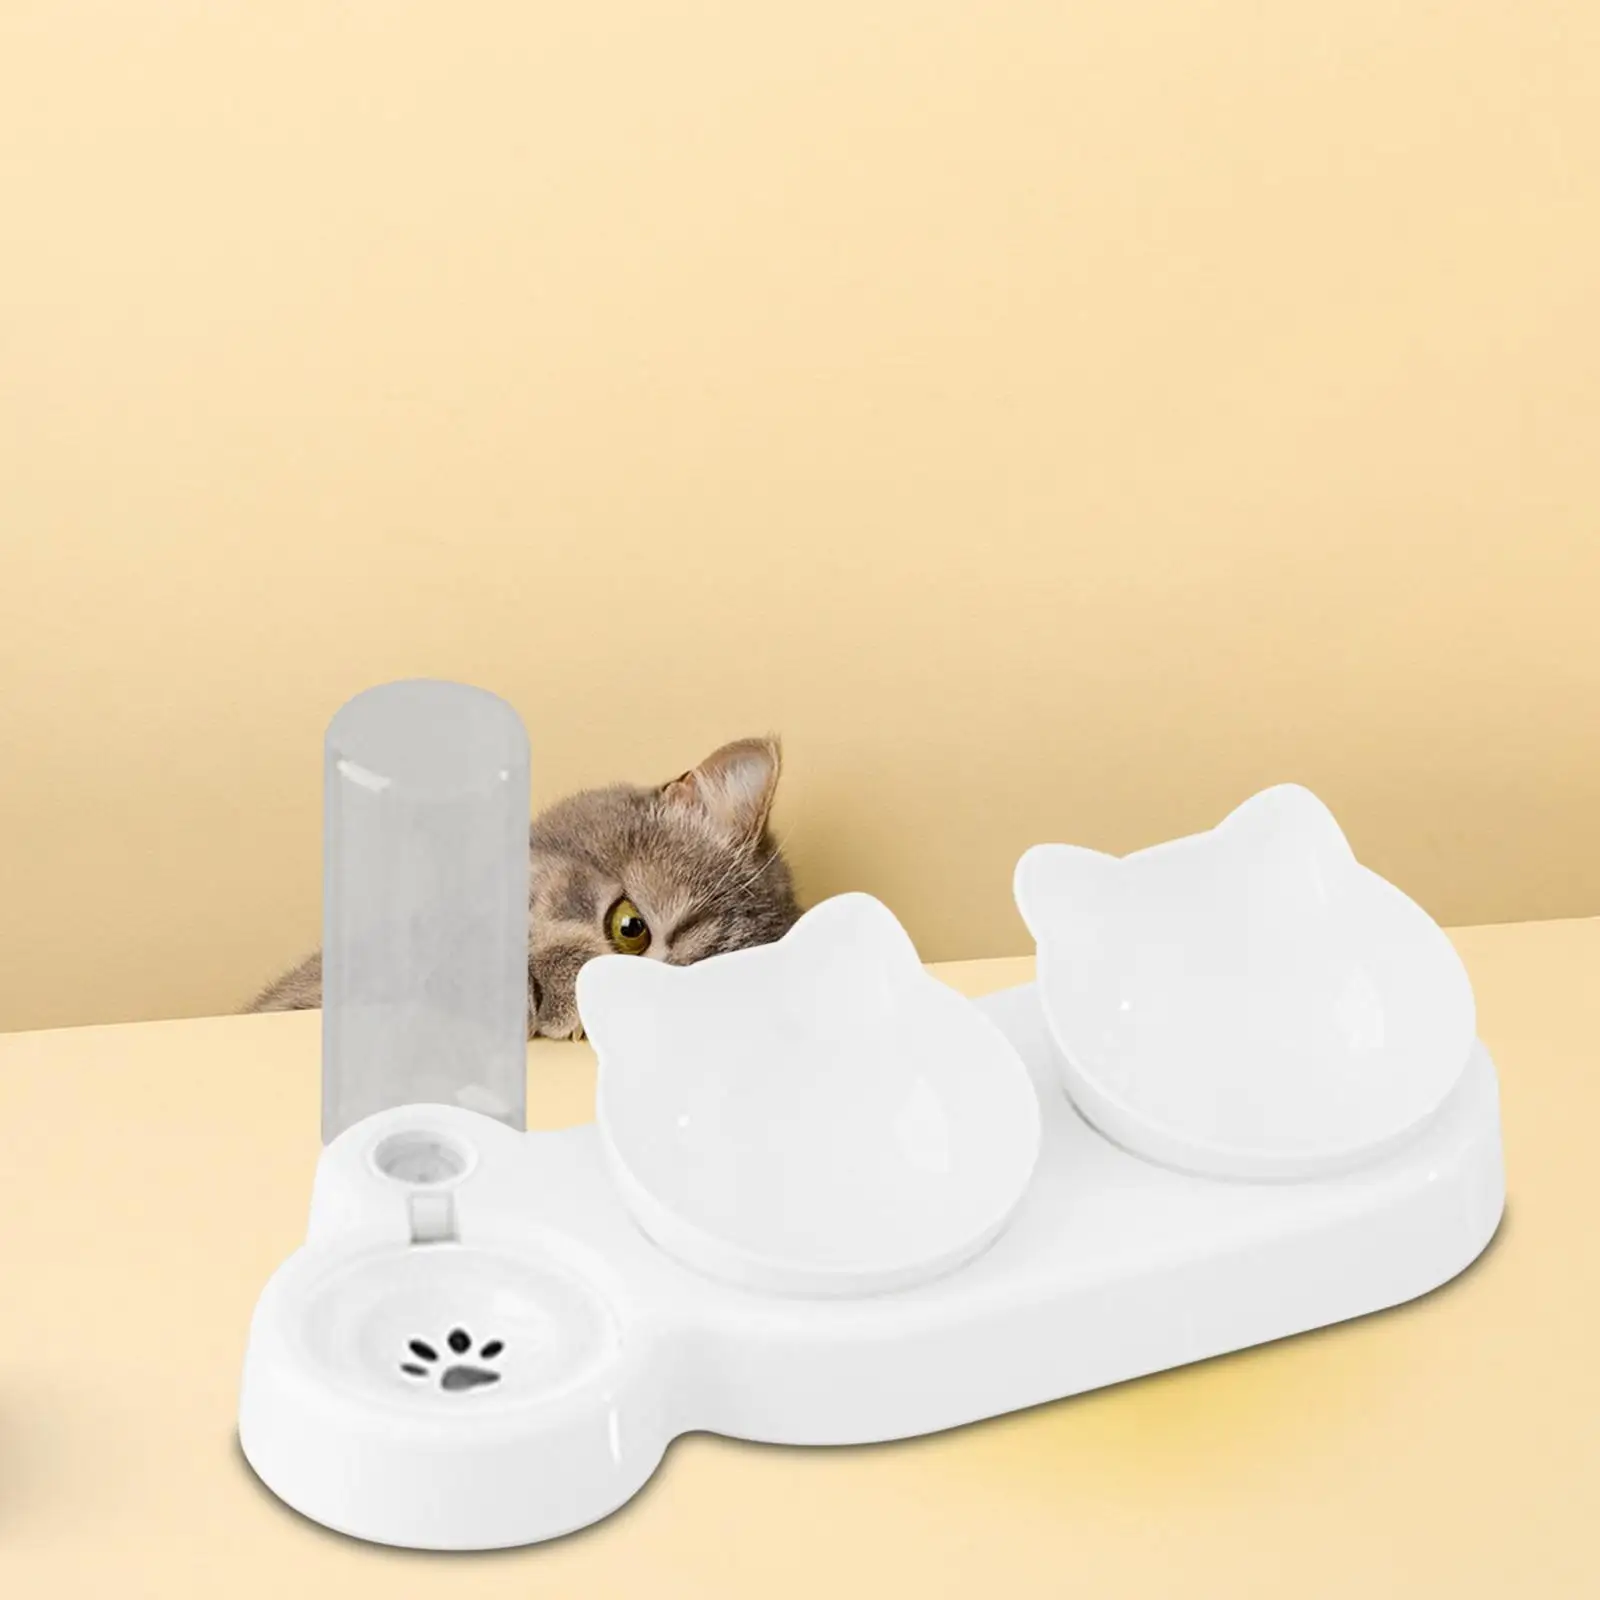 3 in 1 Cat Bowl Wet and Dry Food Bowl Durable Detachable Pet Feeder Pet Feeding